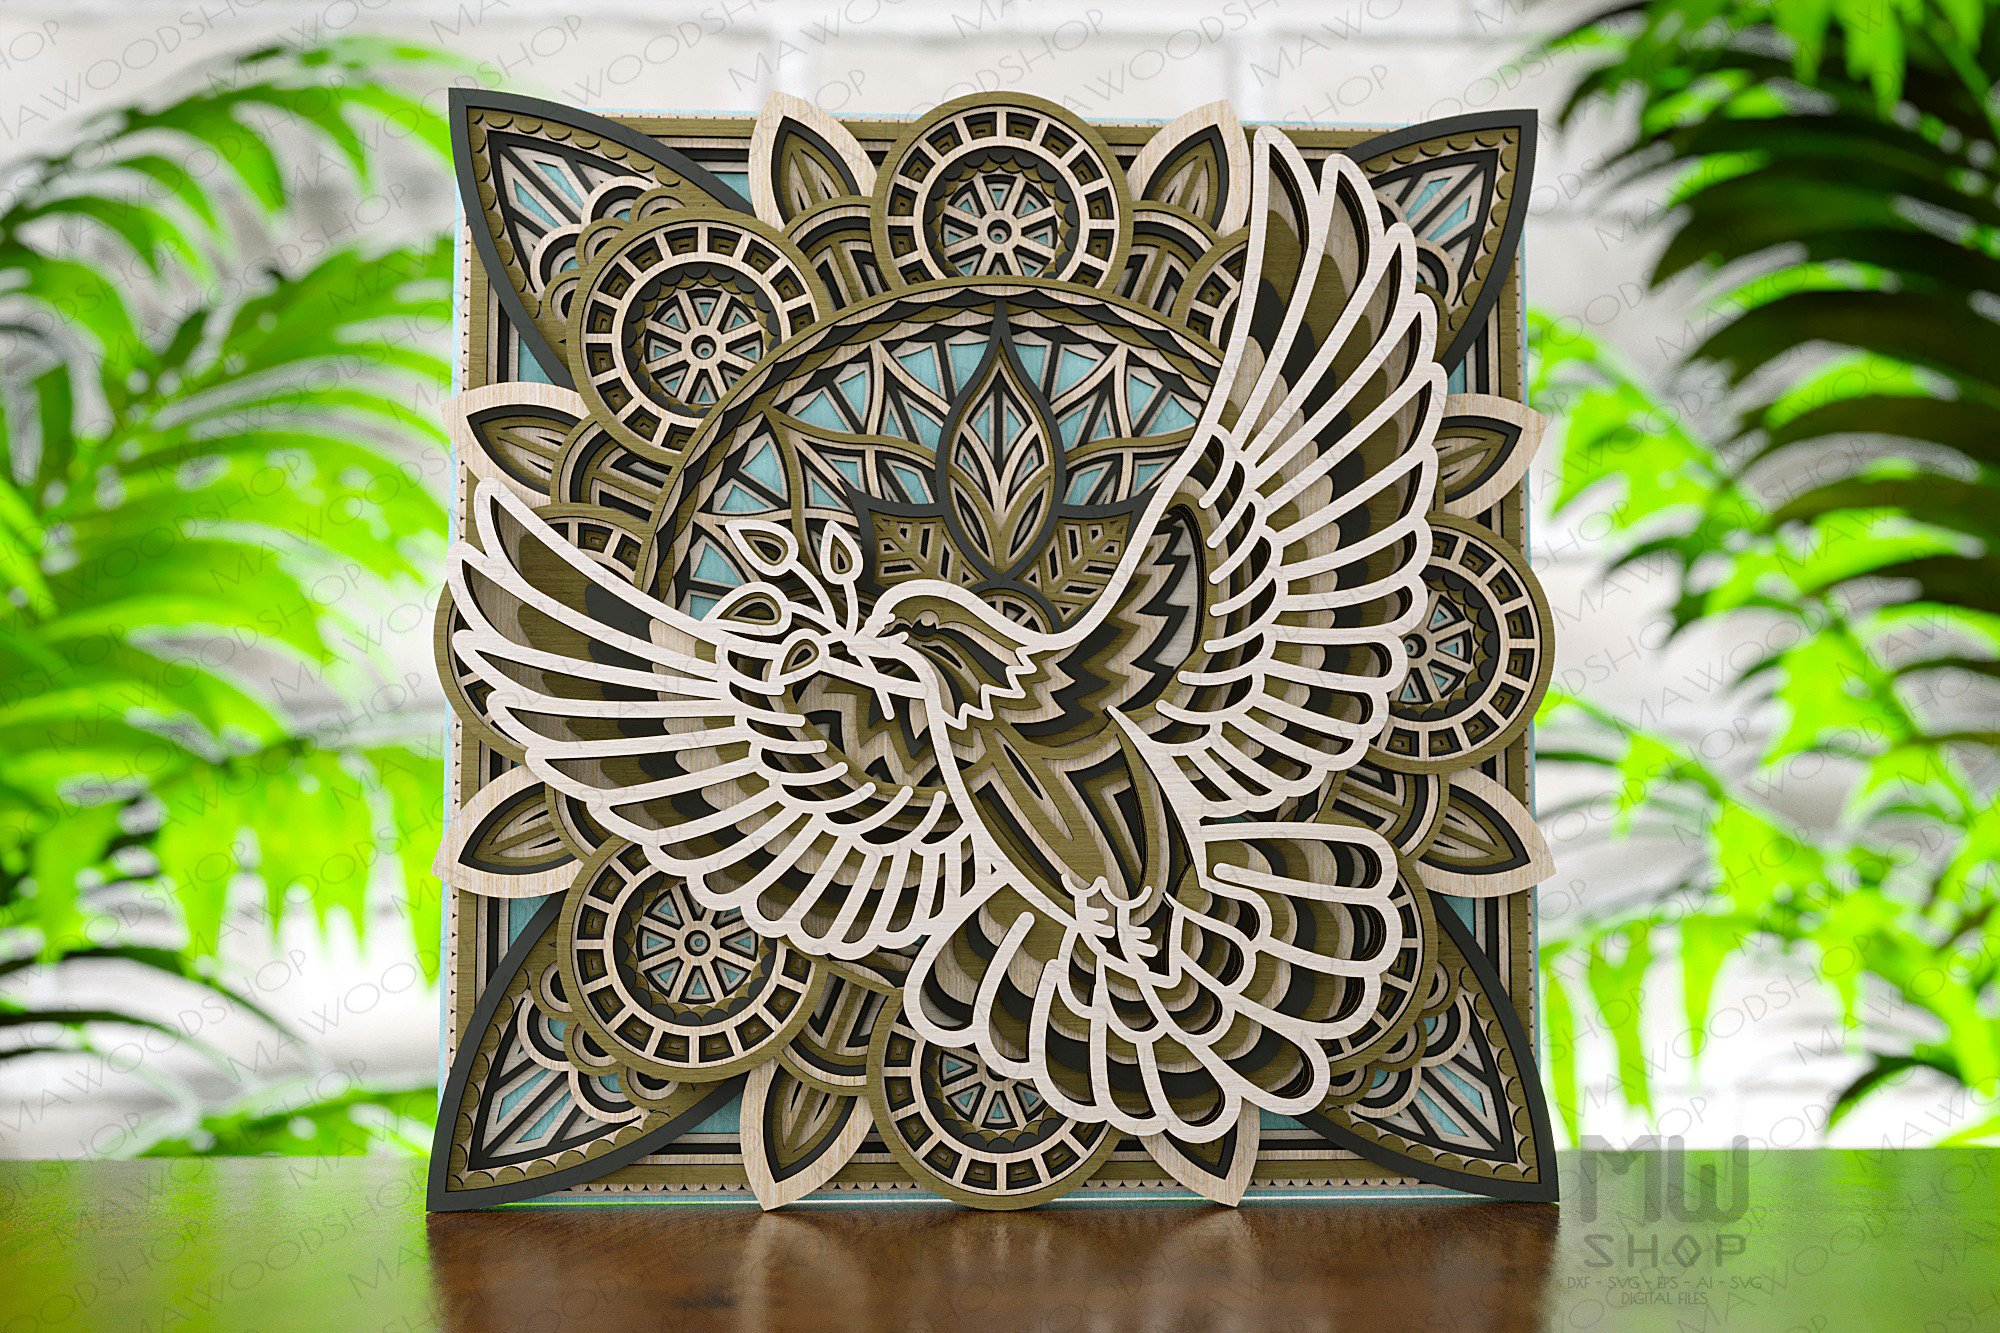 Card with an intricate design on it.